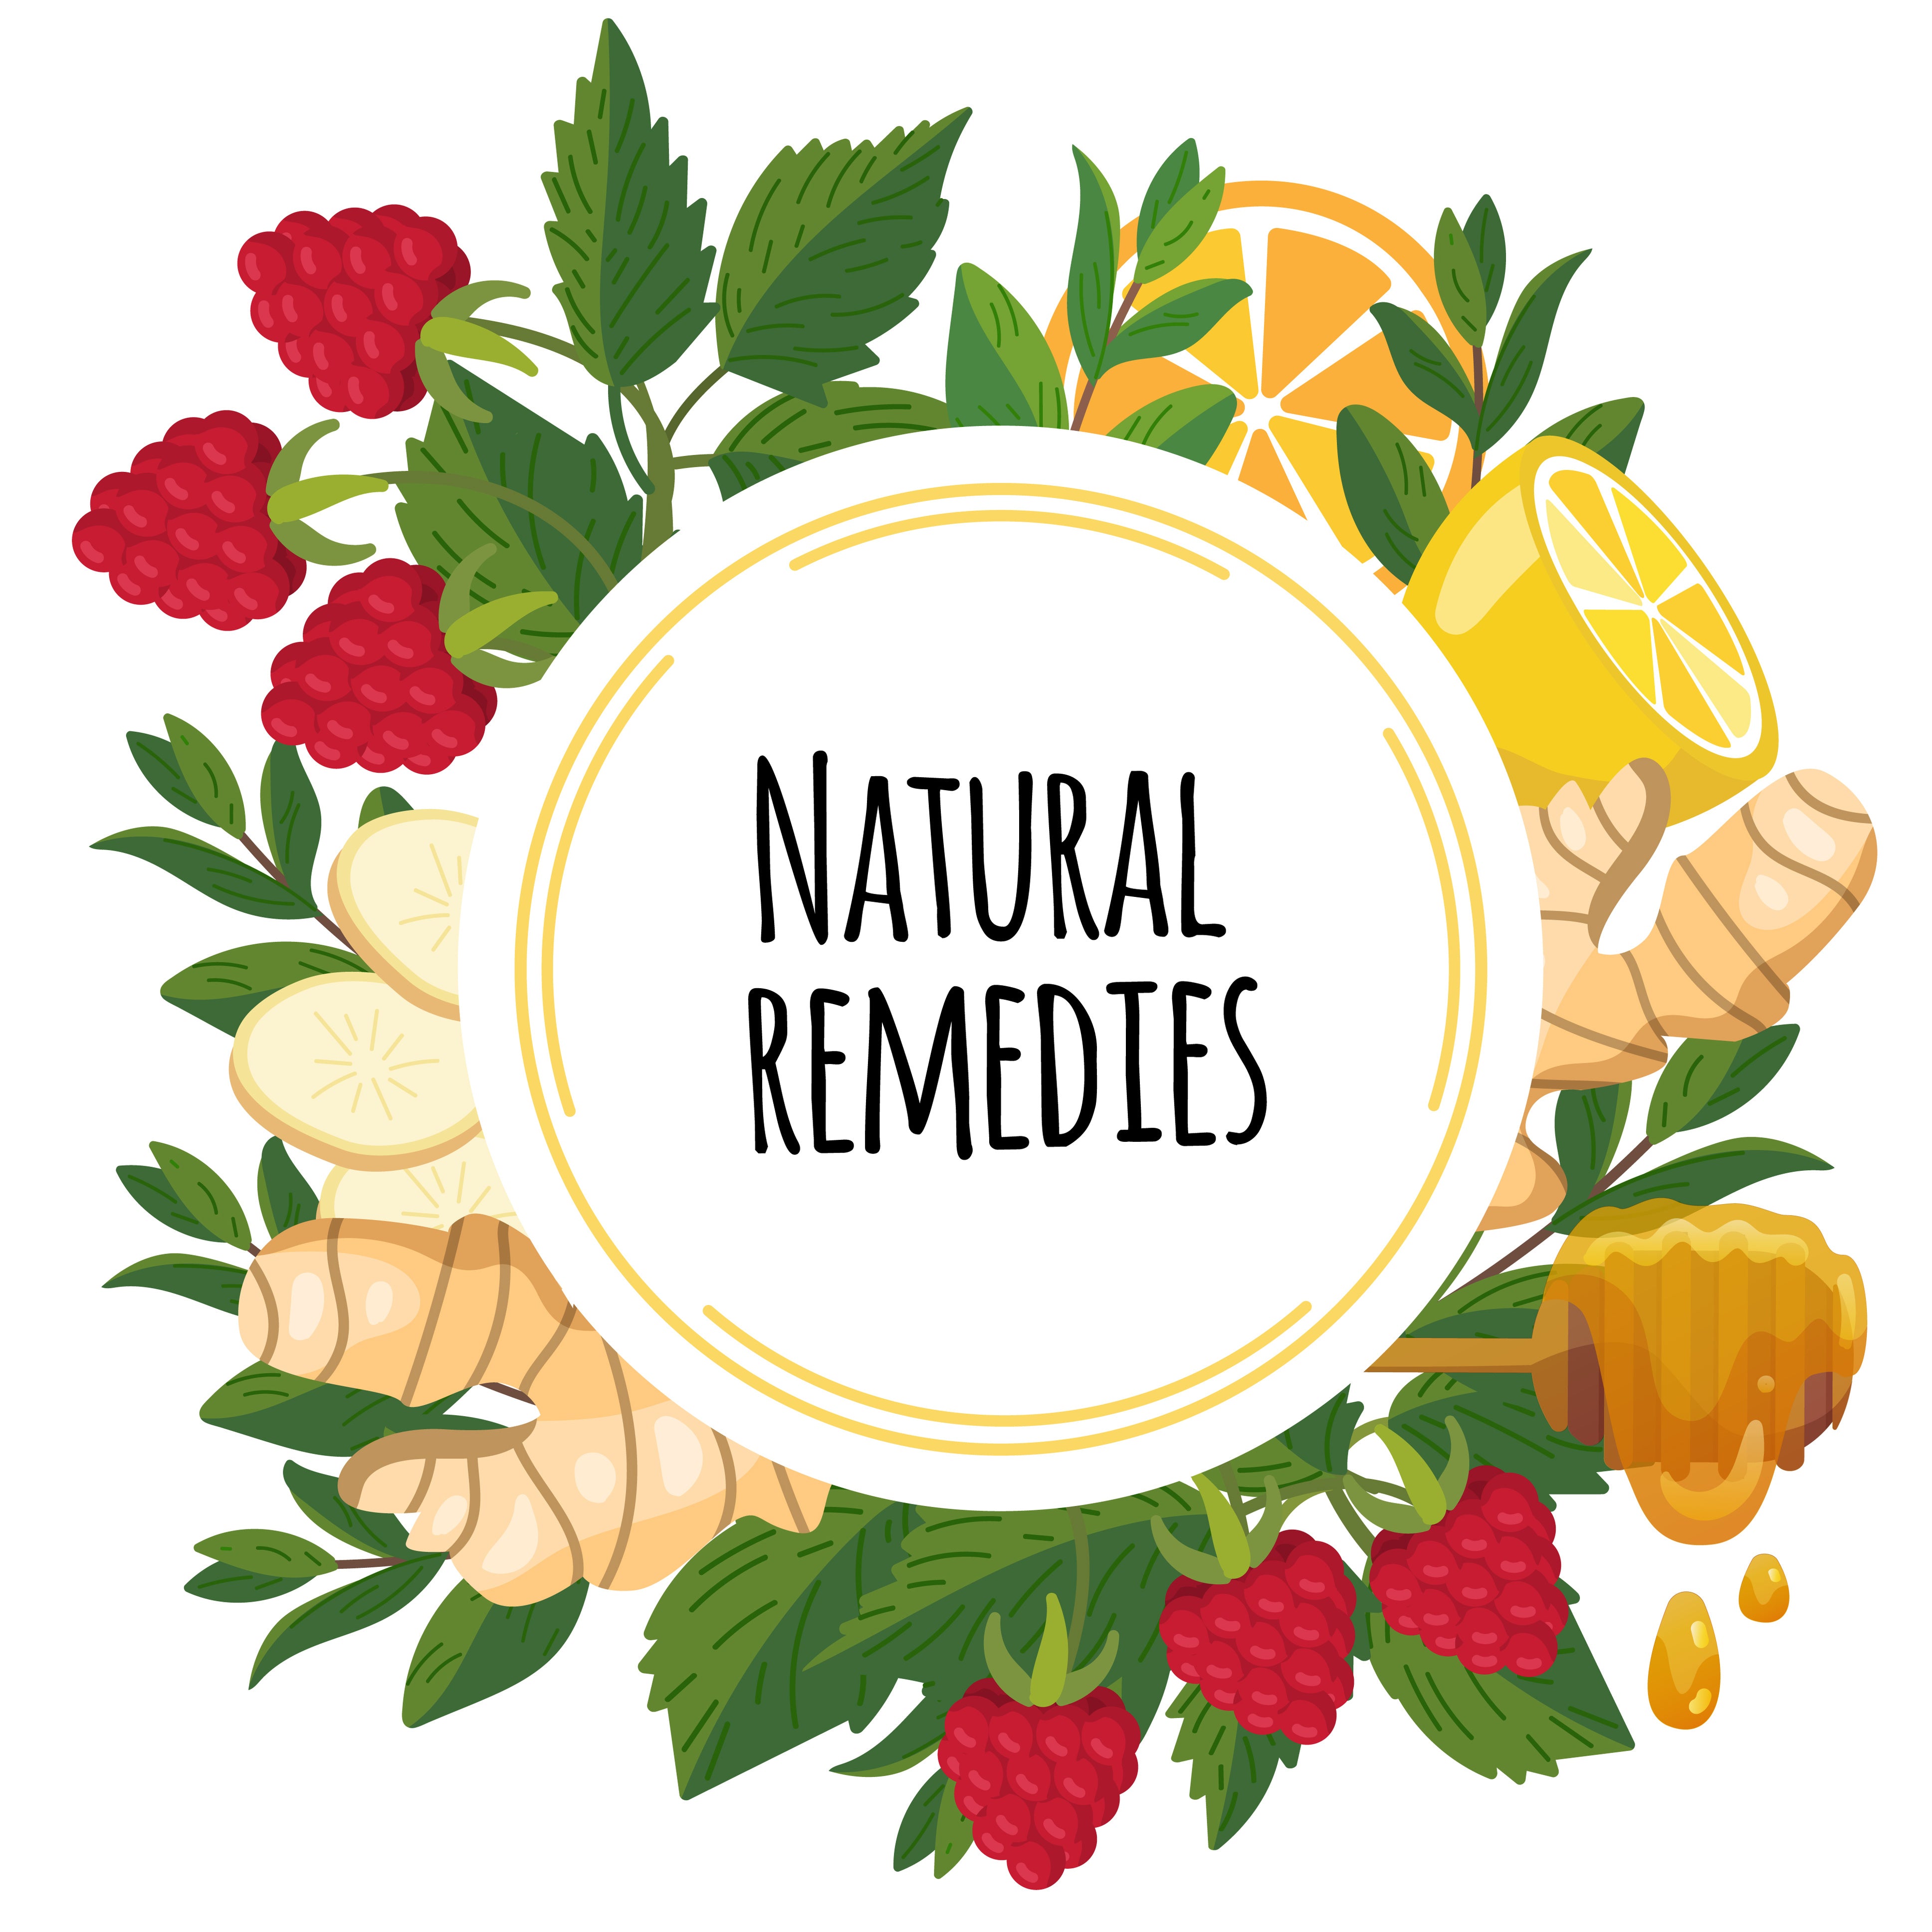 8 Natural Remedies for Common Ailments Backed by Science